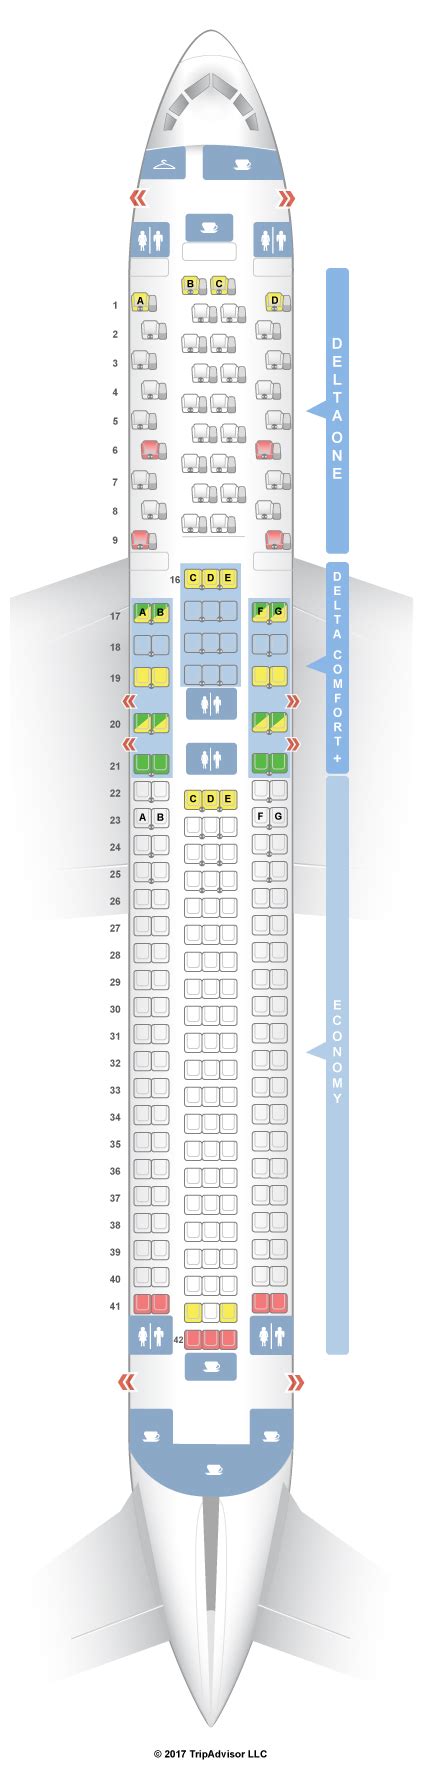 View map. Boeing 757-200 (75P) Recliner Delta One (Rows 1-5) Standard Delta Comfort+ (Rows 15-22) Standard Economy (Rows 23-44) View map. For your next Delta flight, use this seating chart to get the most comfortable seats, legroom, and recline on .